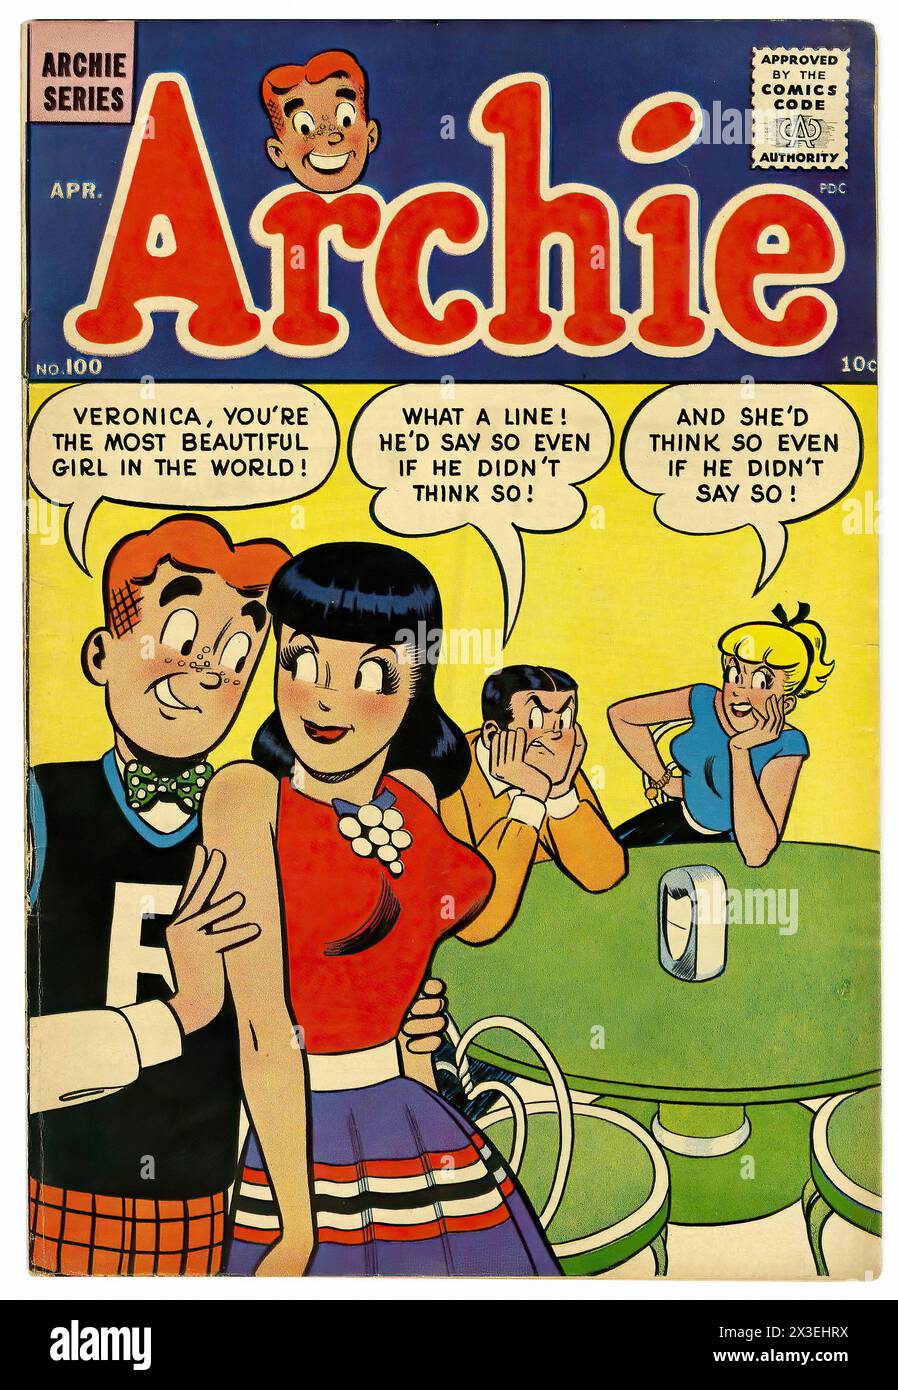 Archie - Vintage american illustrated publication cover Stock Photo